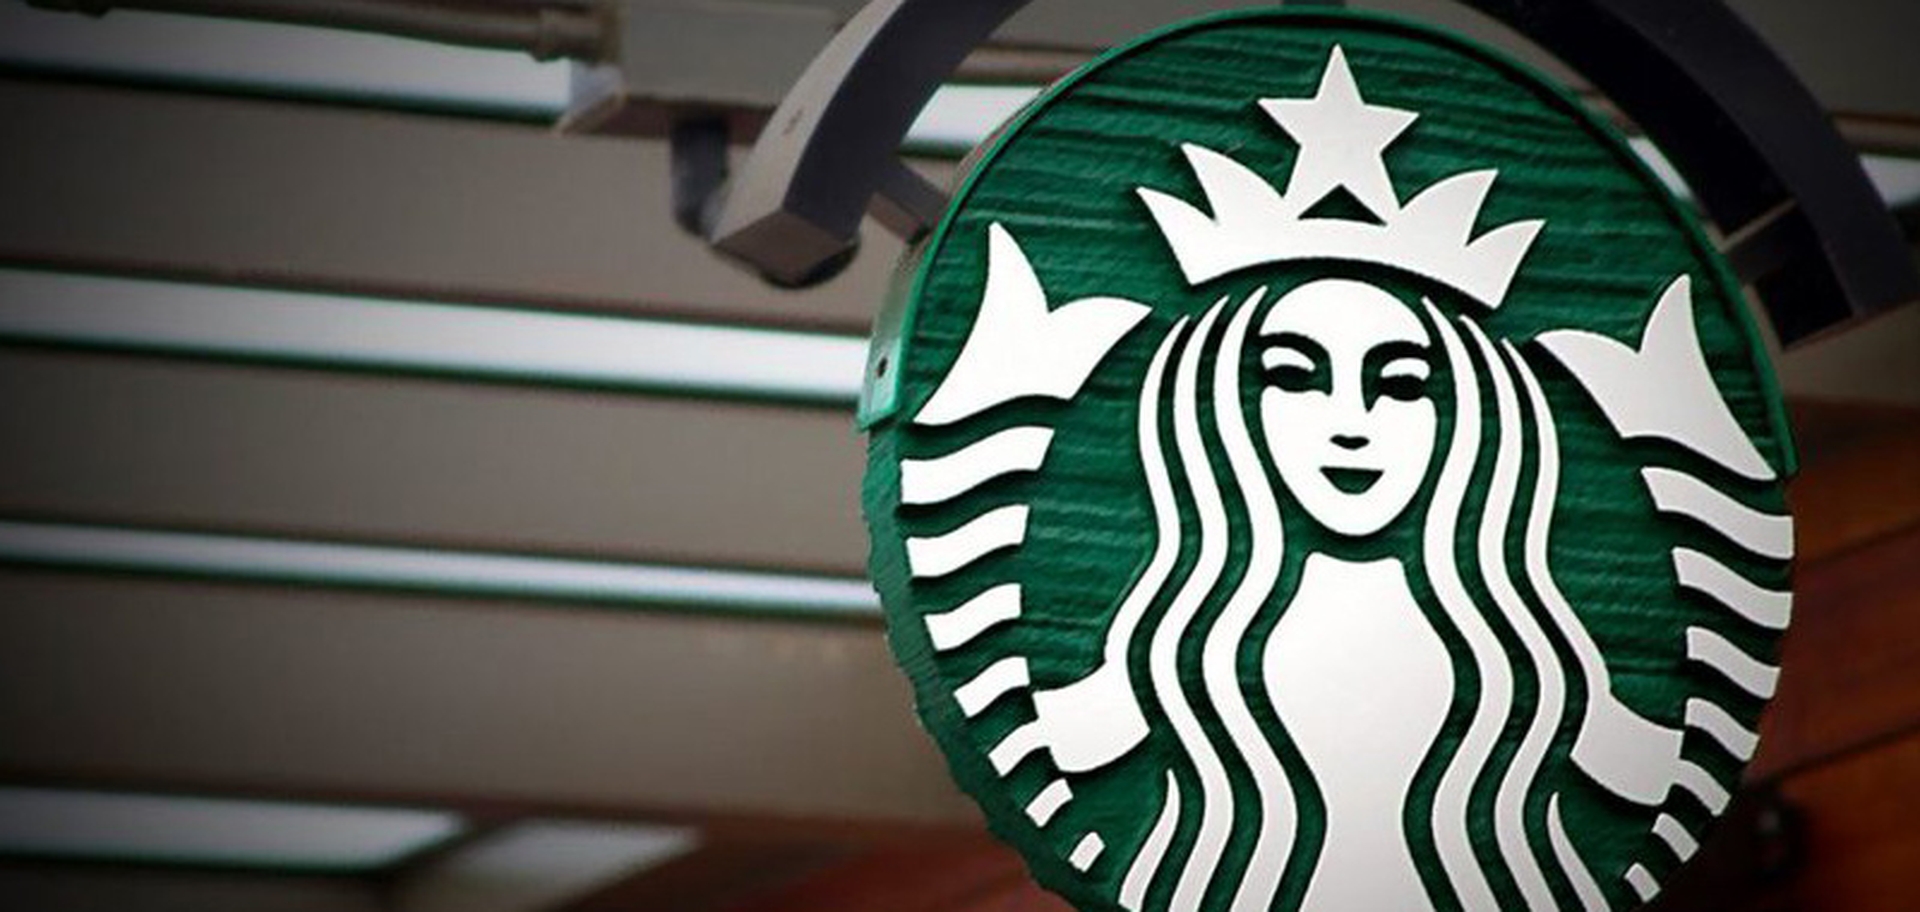 Starbucks Metaverse loyalty program is a platform made by leveraging web3 technologies to create a business-adjacent model of shared loyalty and beneficial ownership with customers.